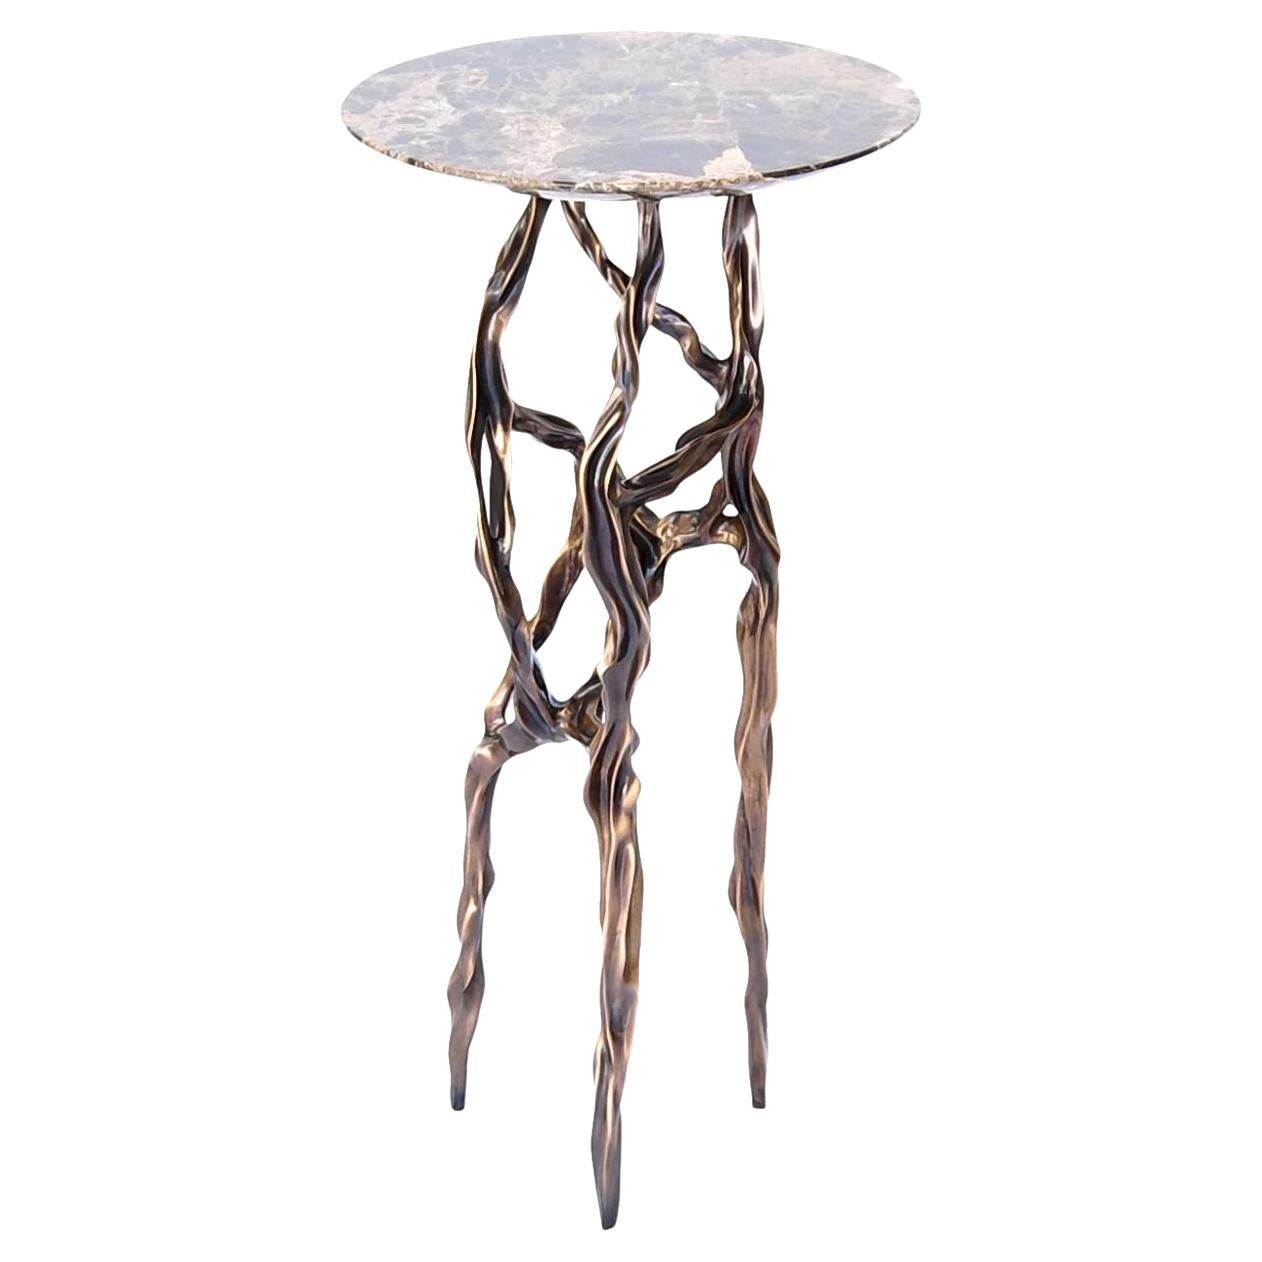 Alexia Drink Table with Marrom Imperial Marble Top by Fakasaka Design For Sale